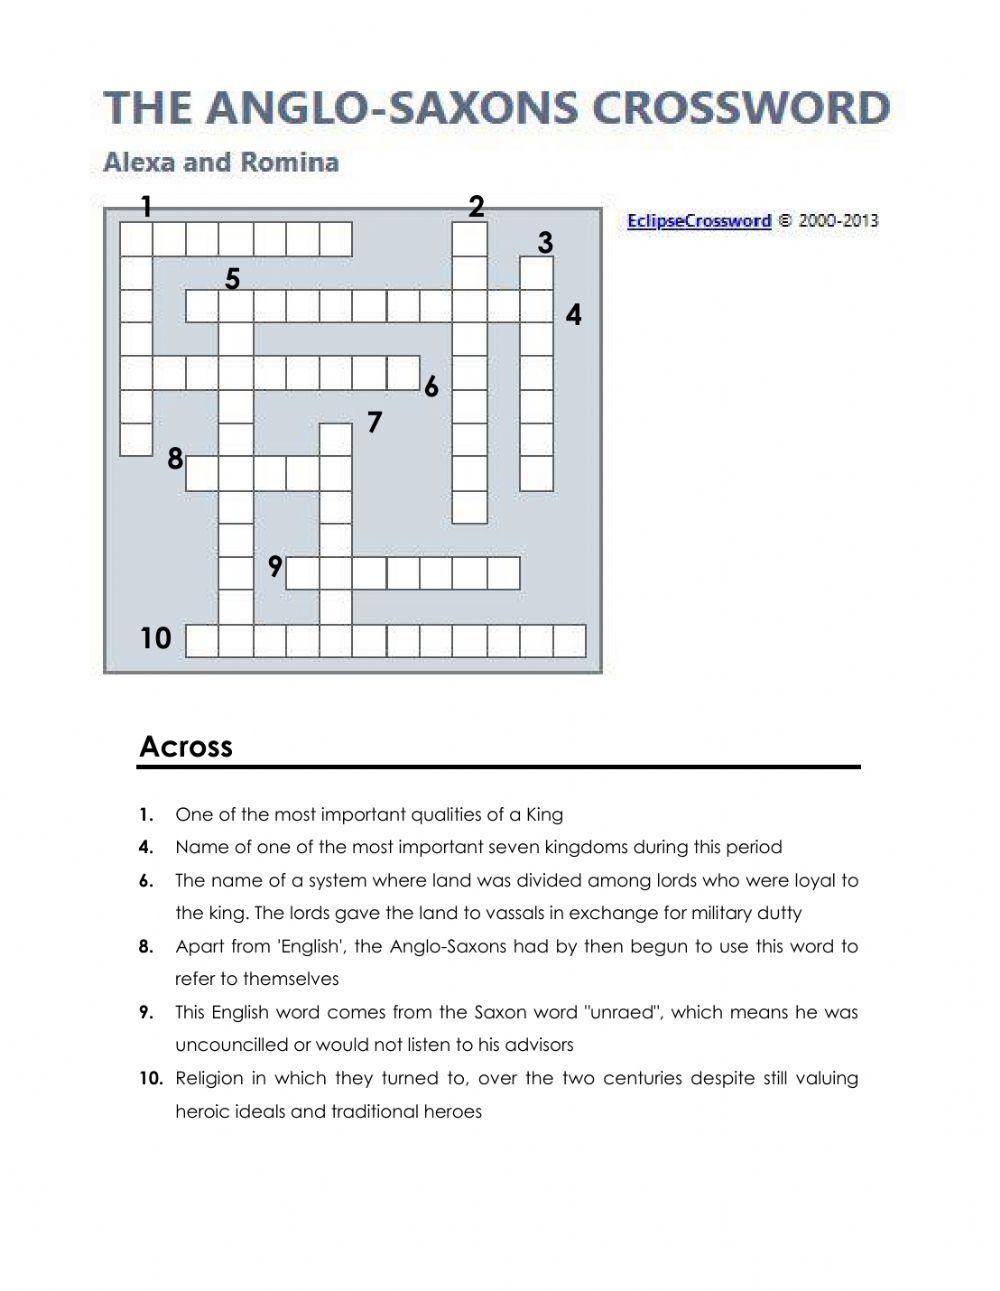 Anglo-Saxons crossword